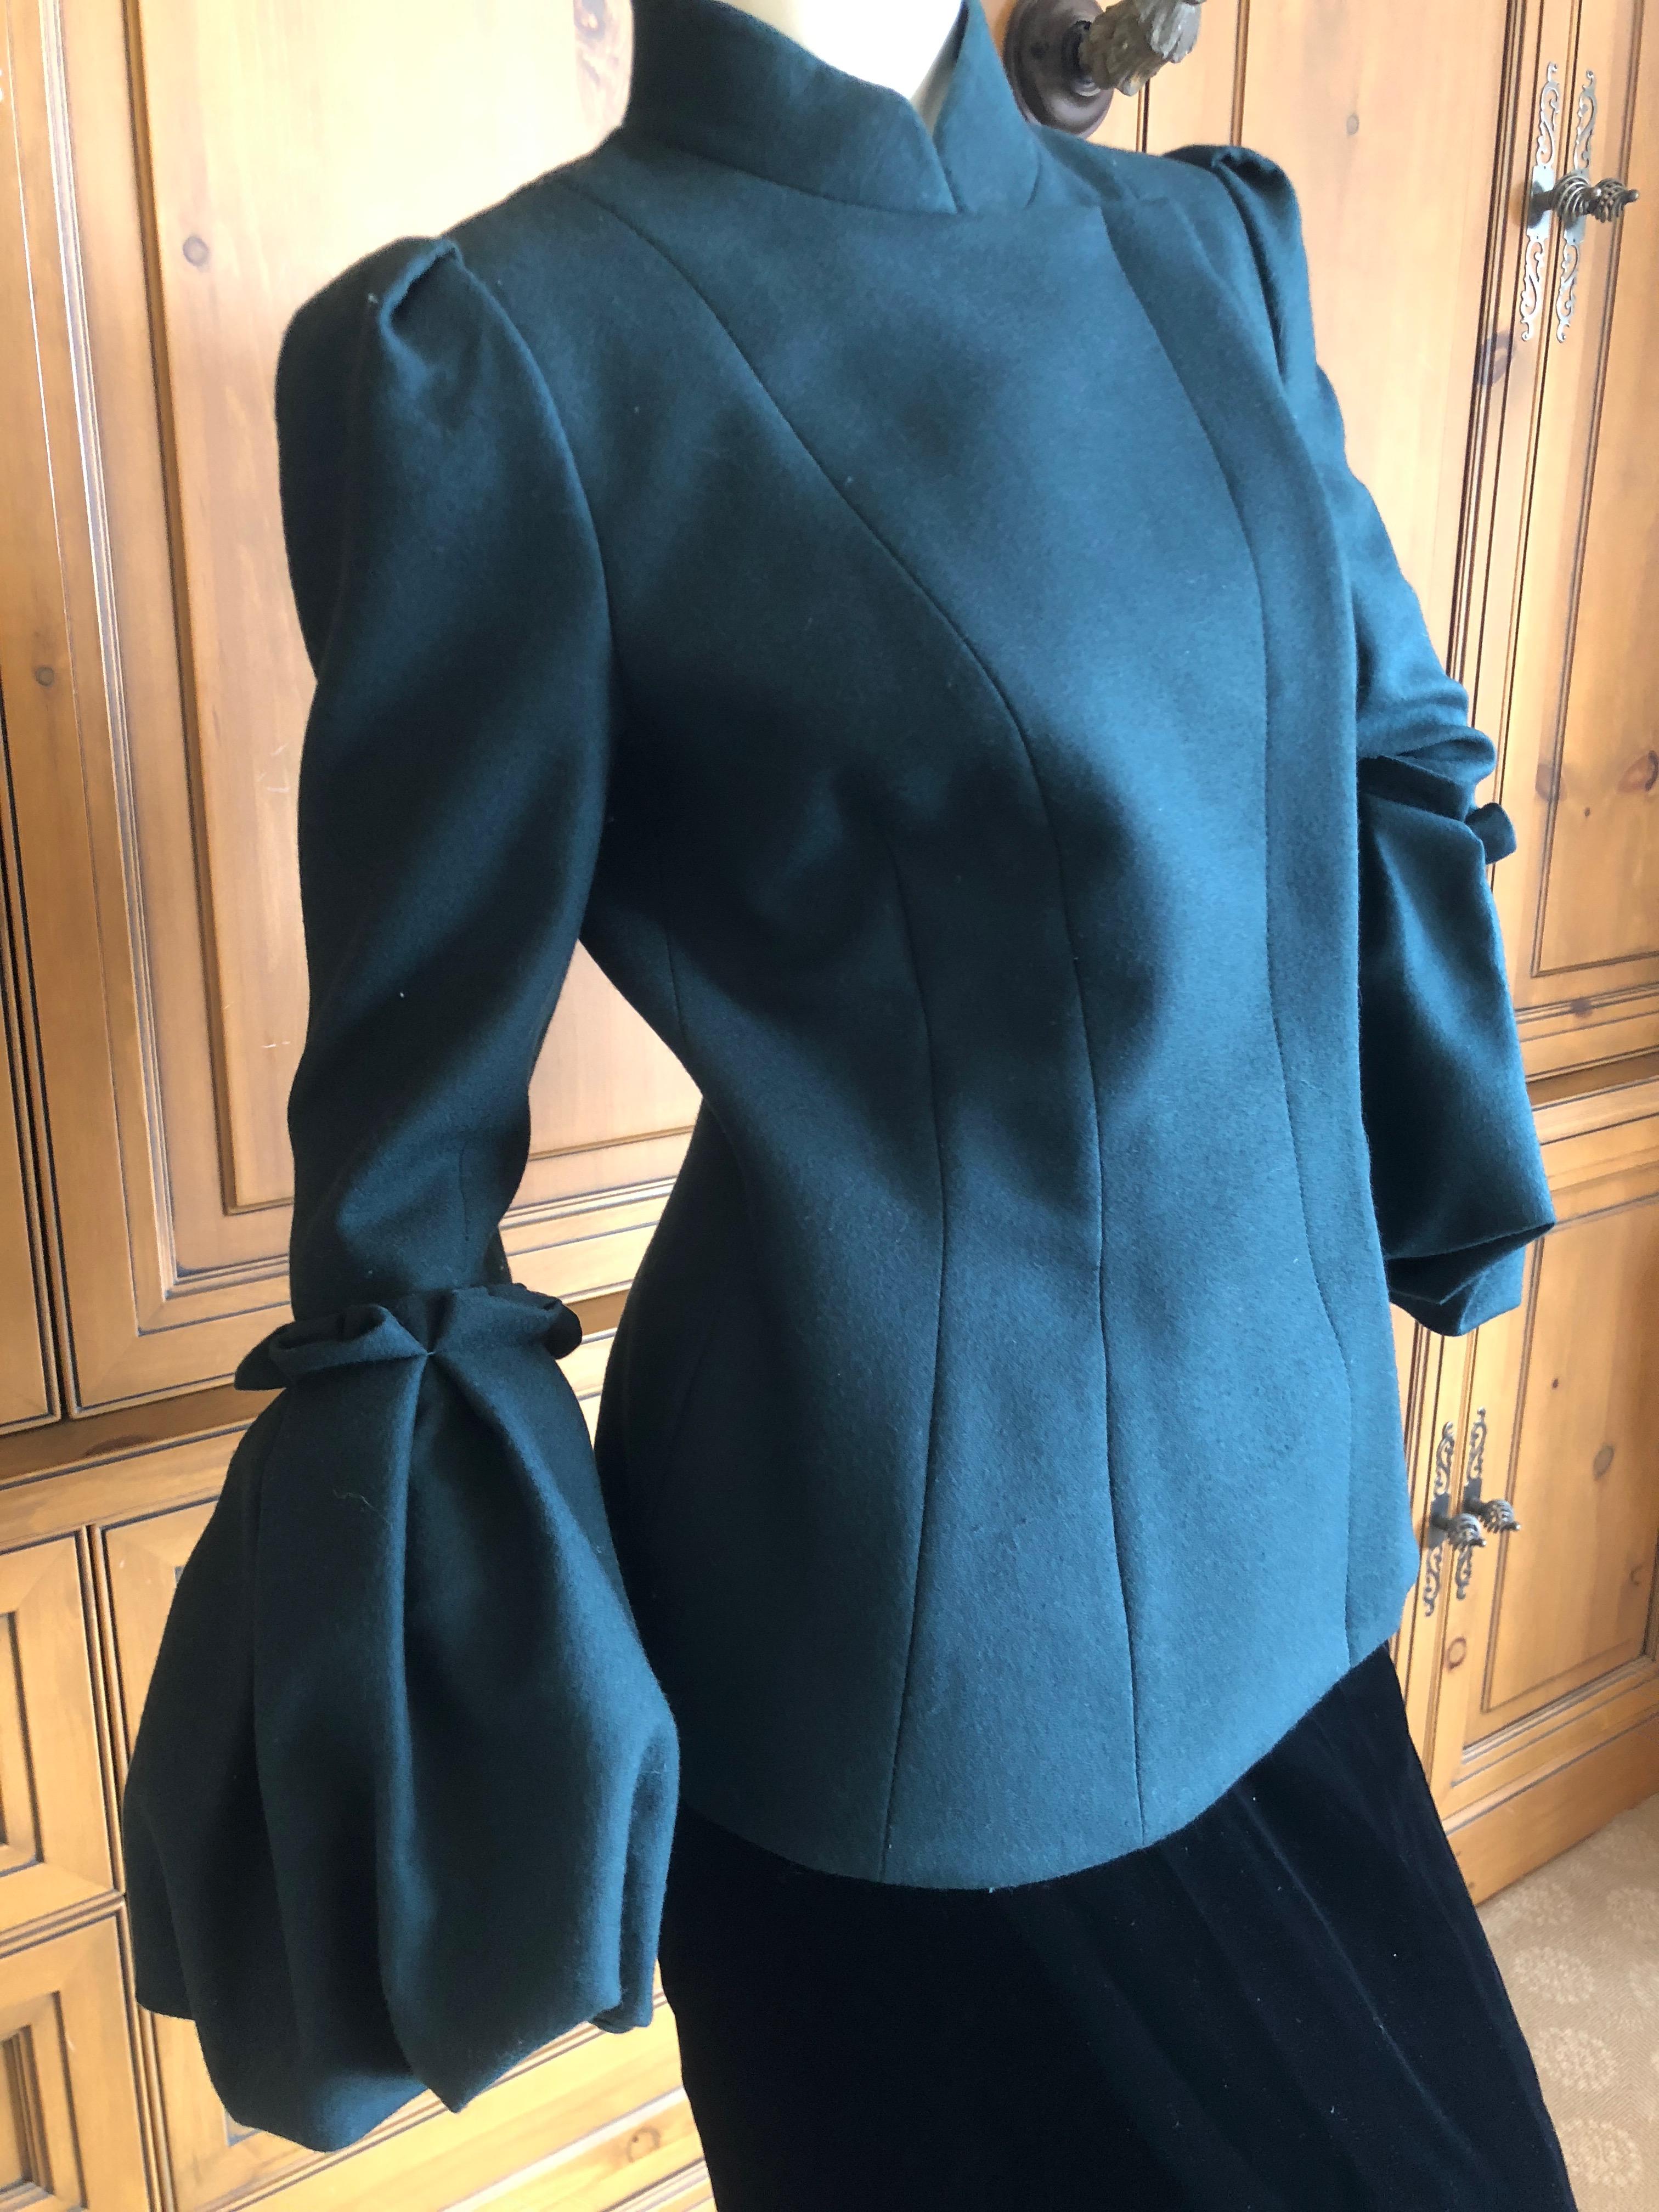 Alexander McQueen Teal Green Wool Jacket with Exaggerated Cuffs Size 42 For Sale 1